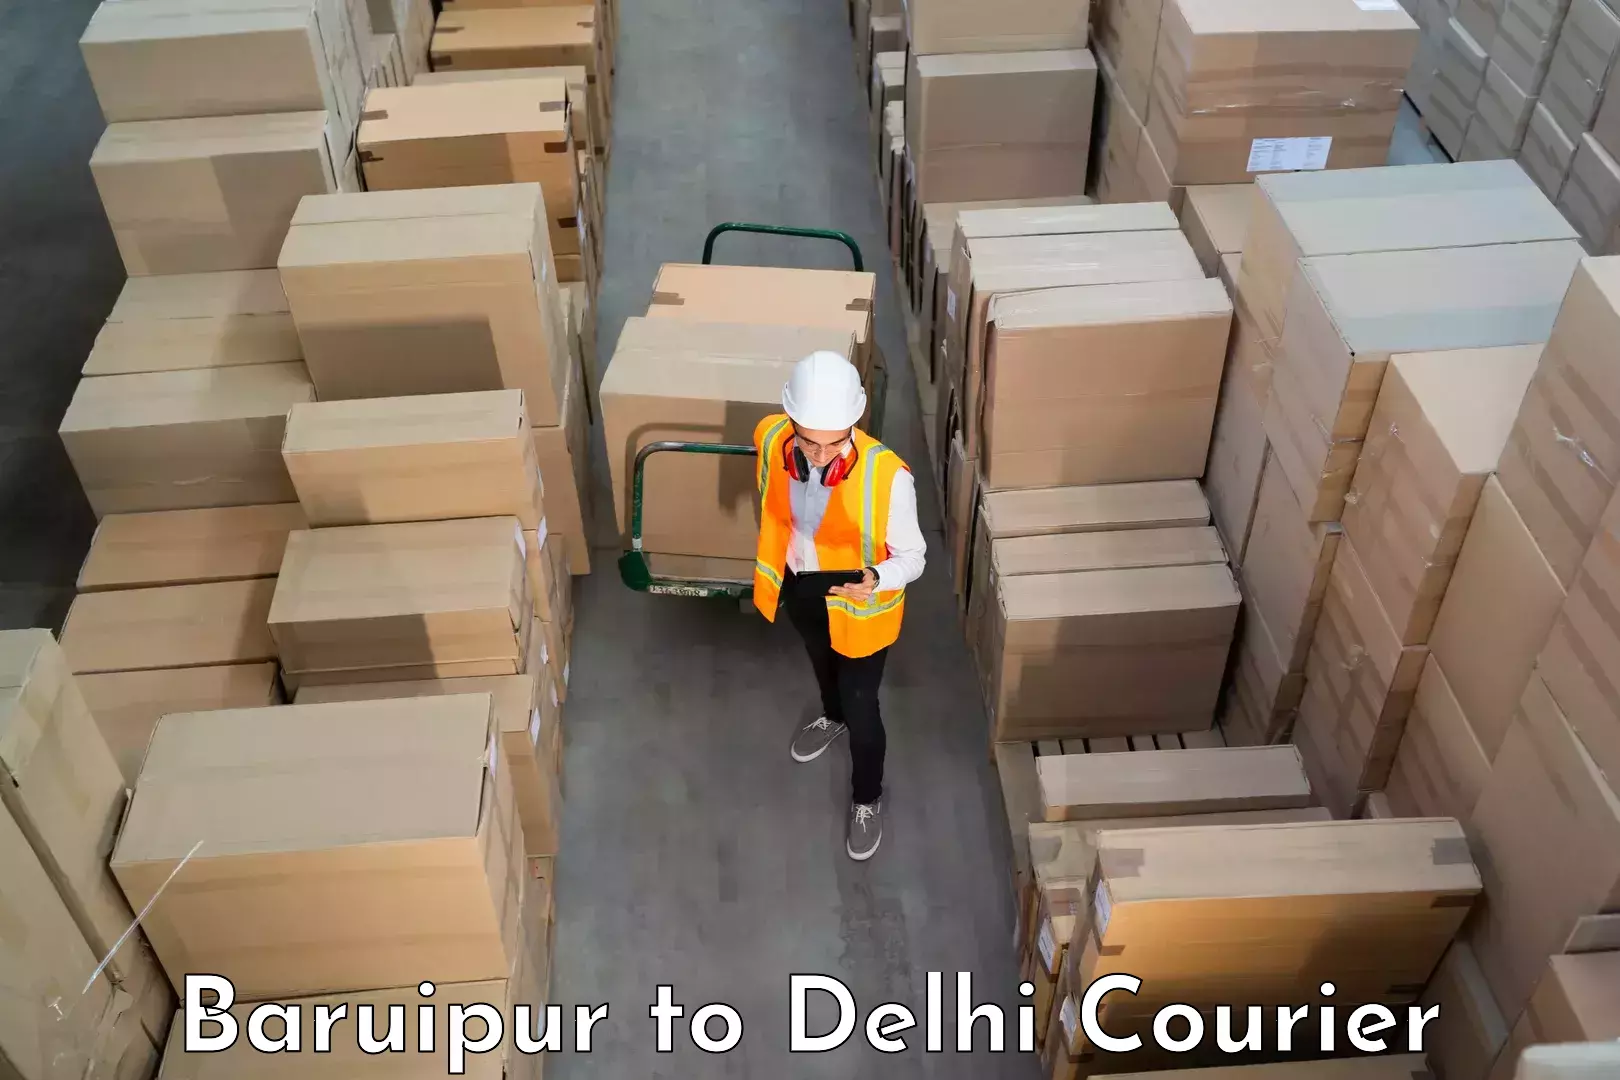 Furniture relocation experts Baruipur to NCR